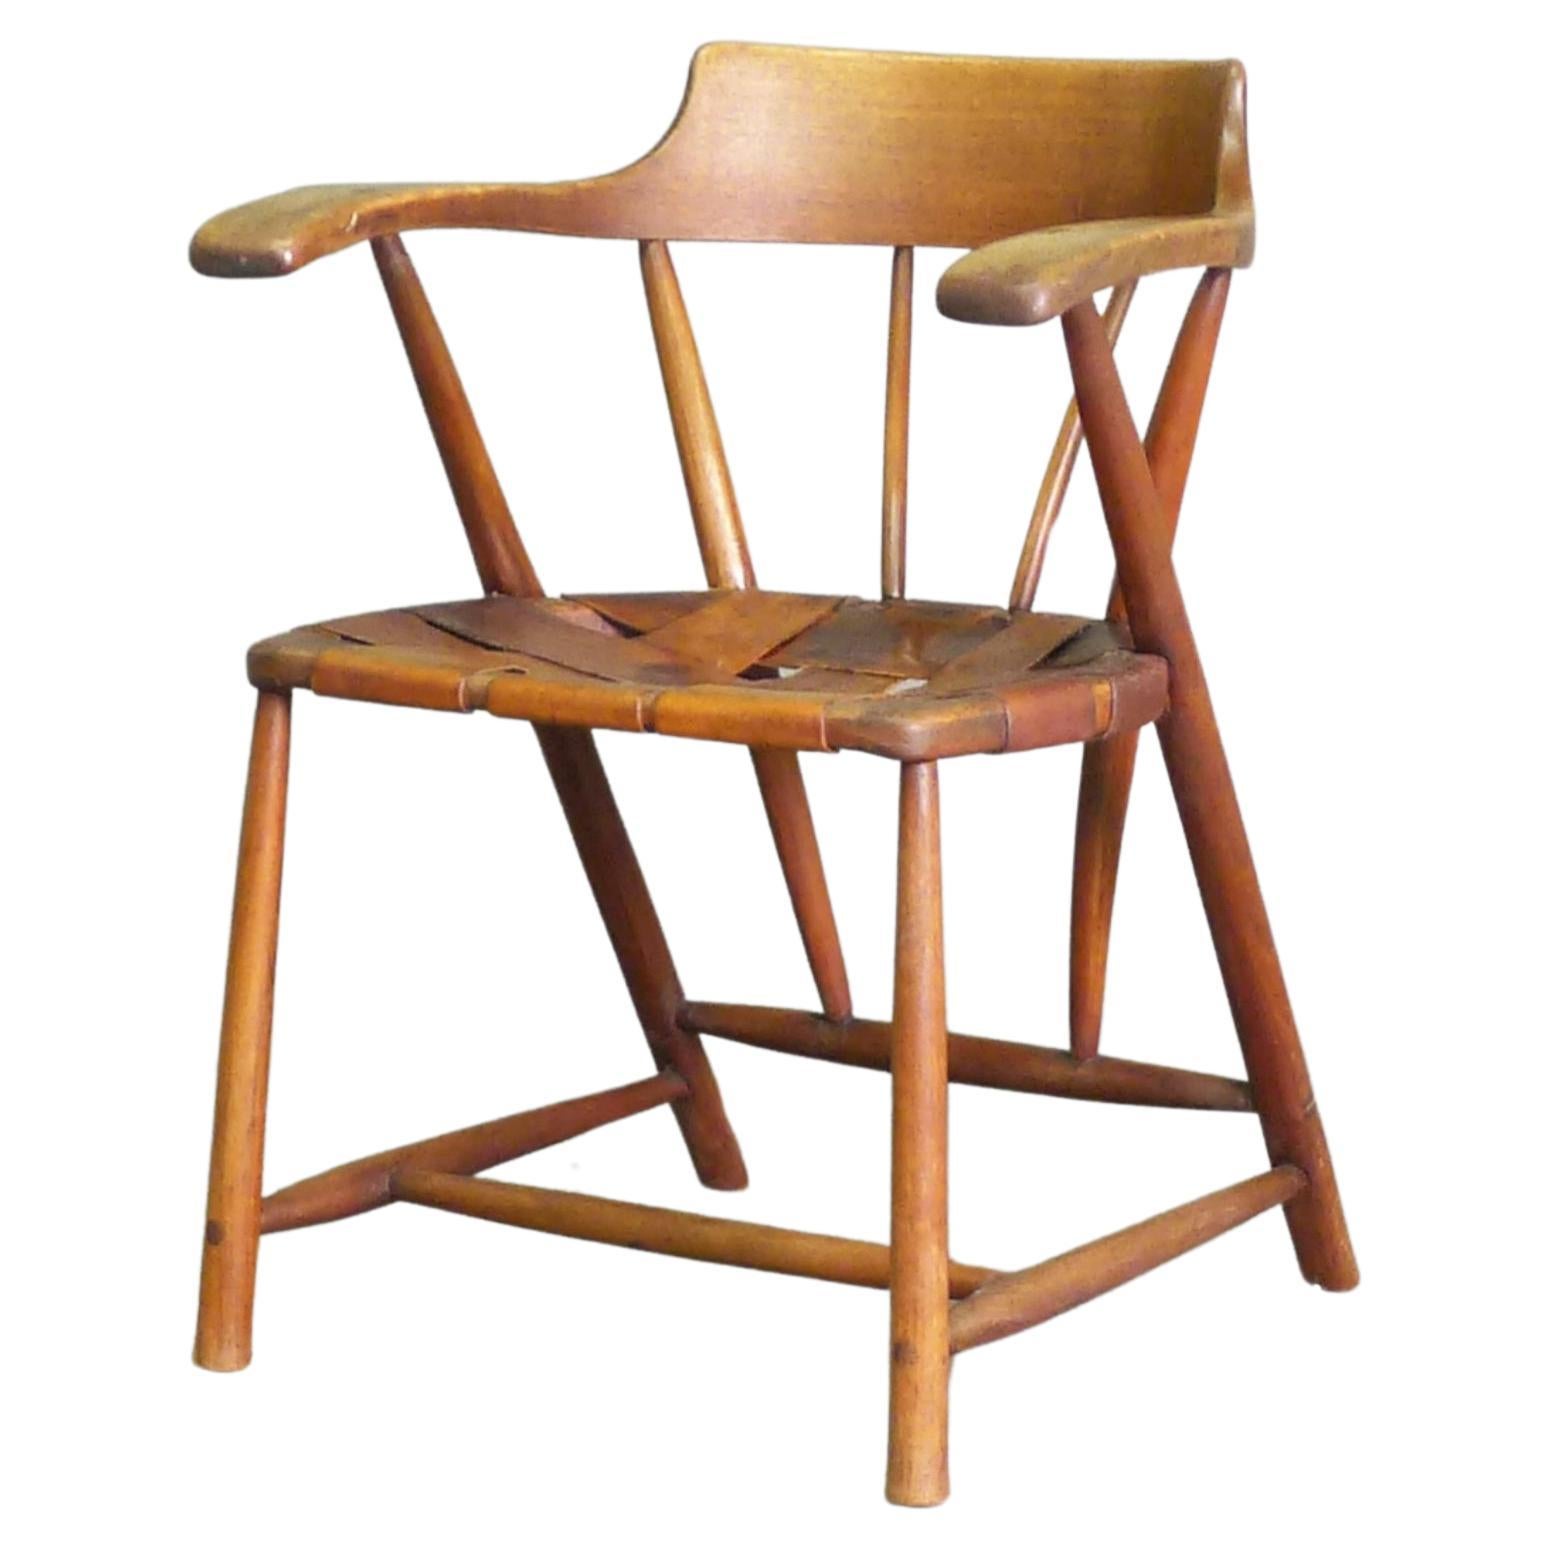 Wharton Esherick, Captains Chair, walnut and leather, initialled and dated 1951